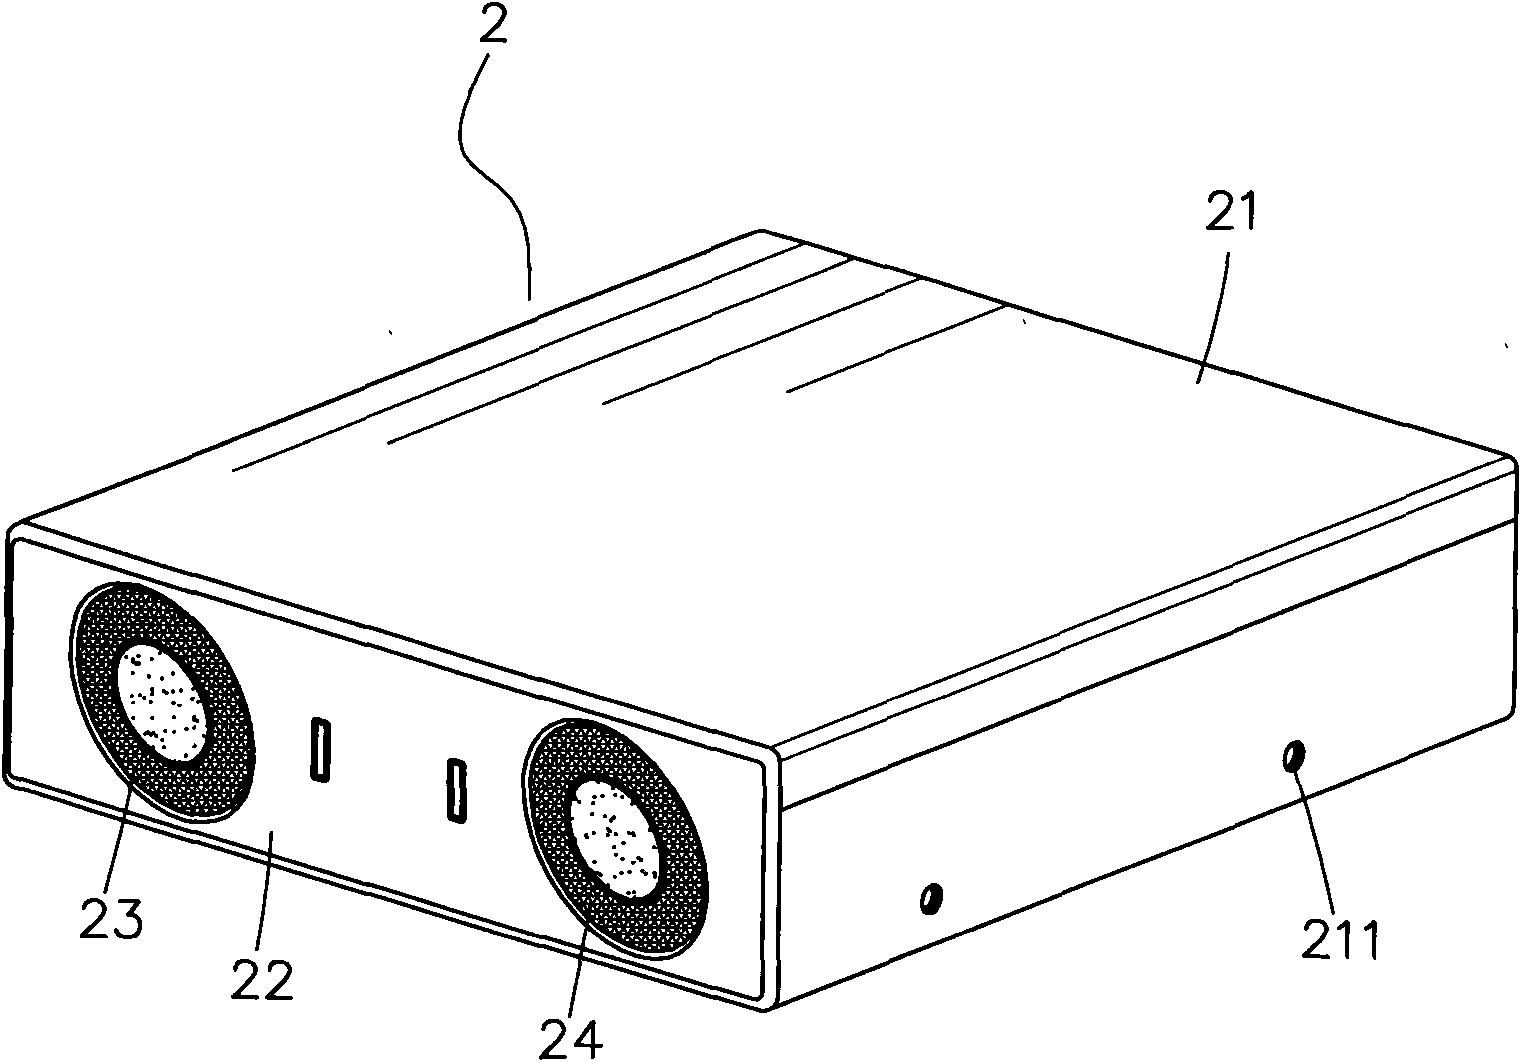 Modularized speaker device placed on computer disk rack